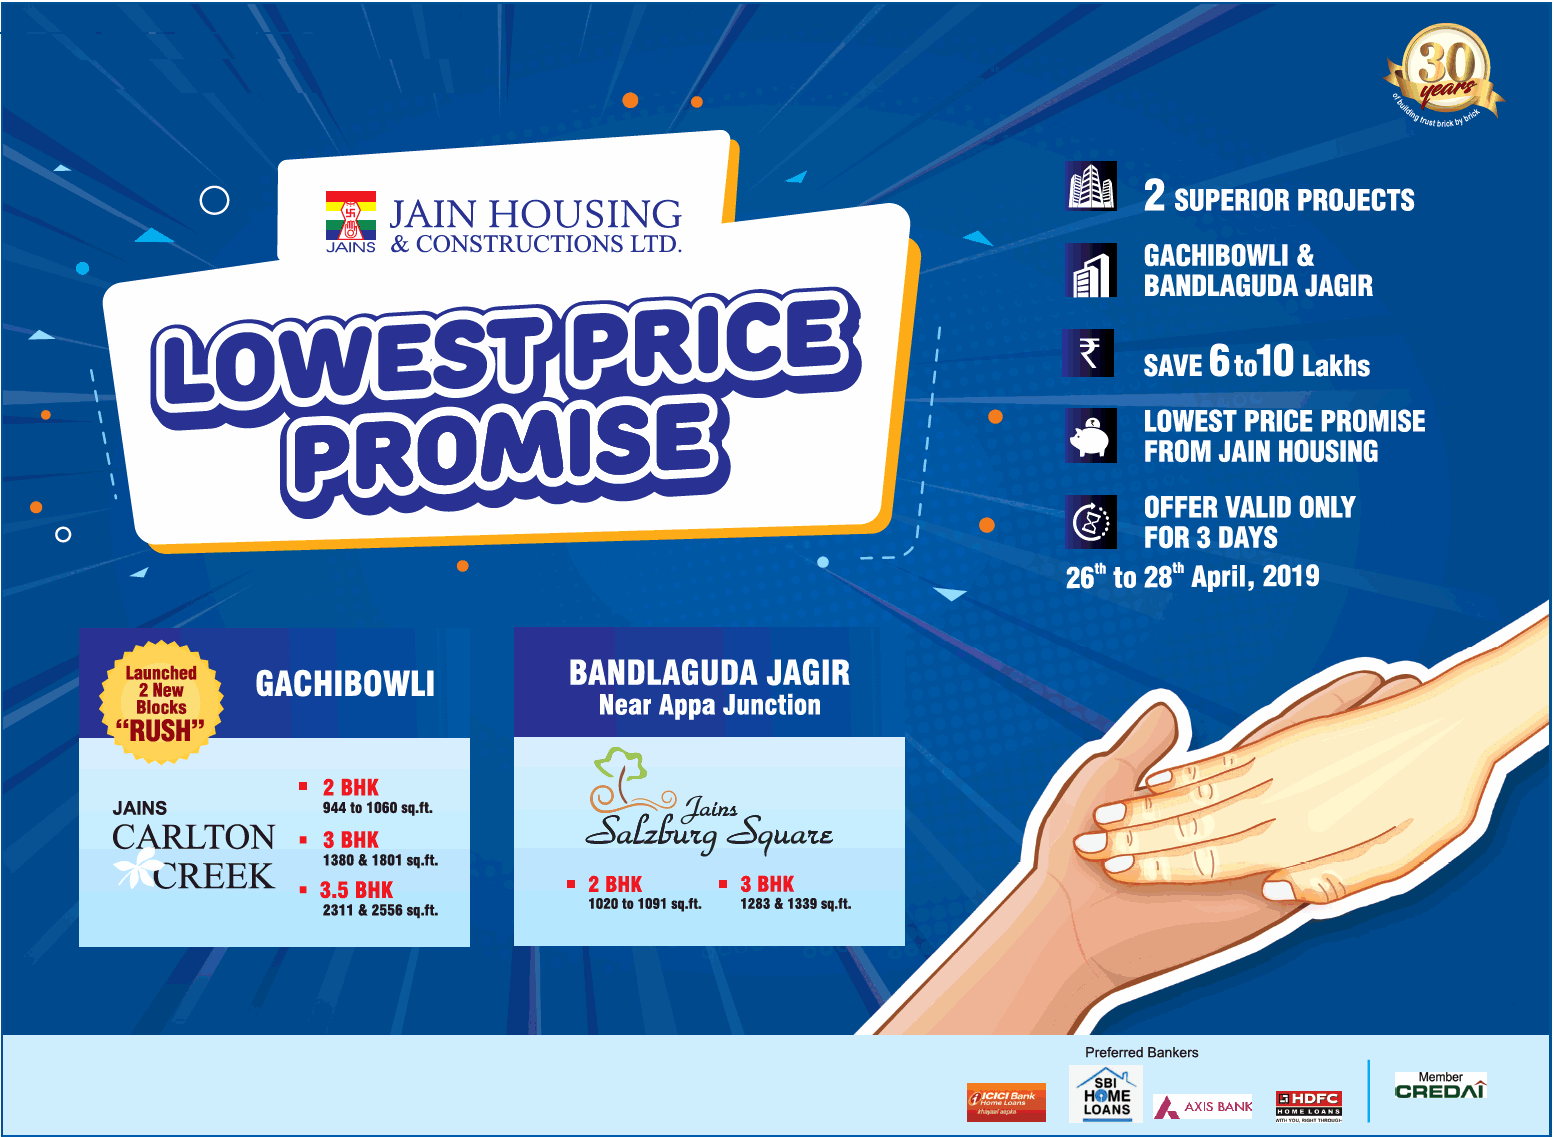 Avail lowest price promise from Jain Housing in Hyderabad